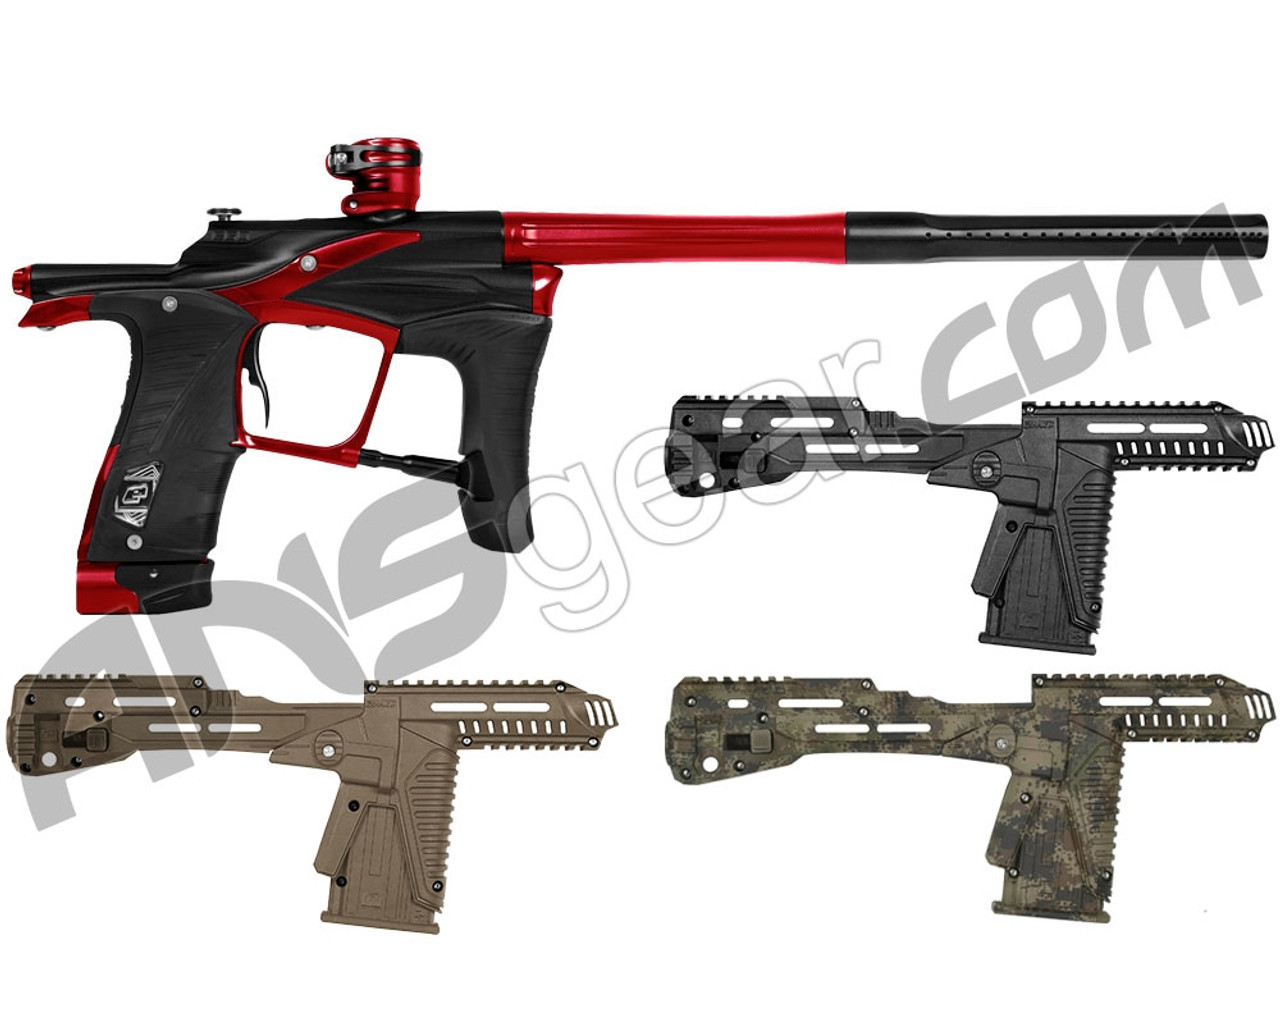 Used Planet Eclipse Ego LV1.1 Paintball Marker Gun with Case - Red / Black